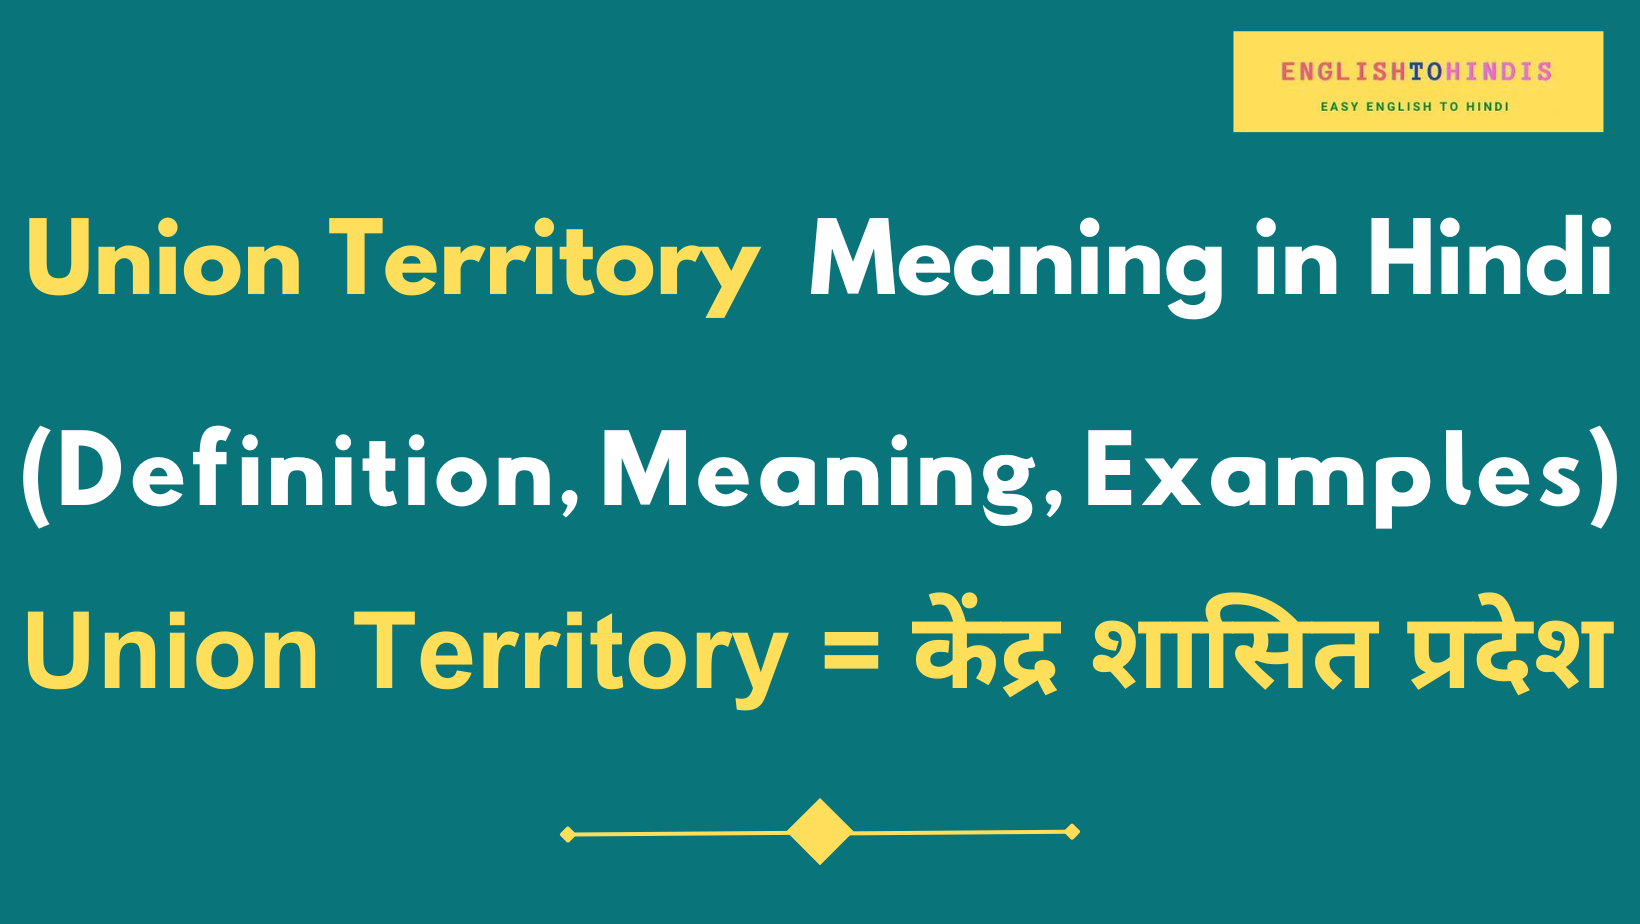 Union Territory Meaning in Hindi